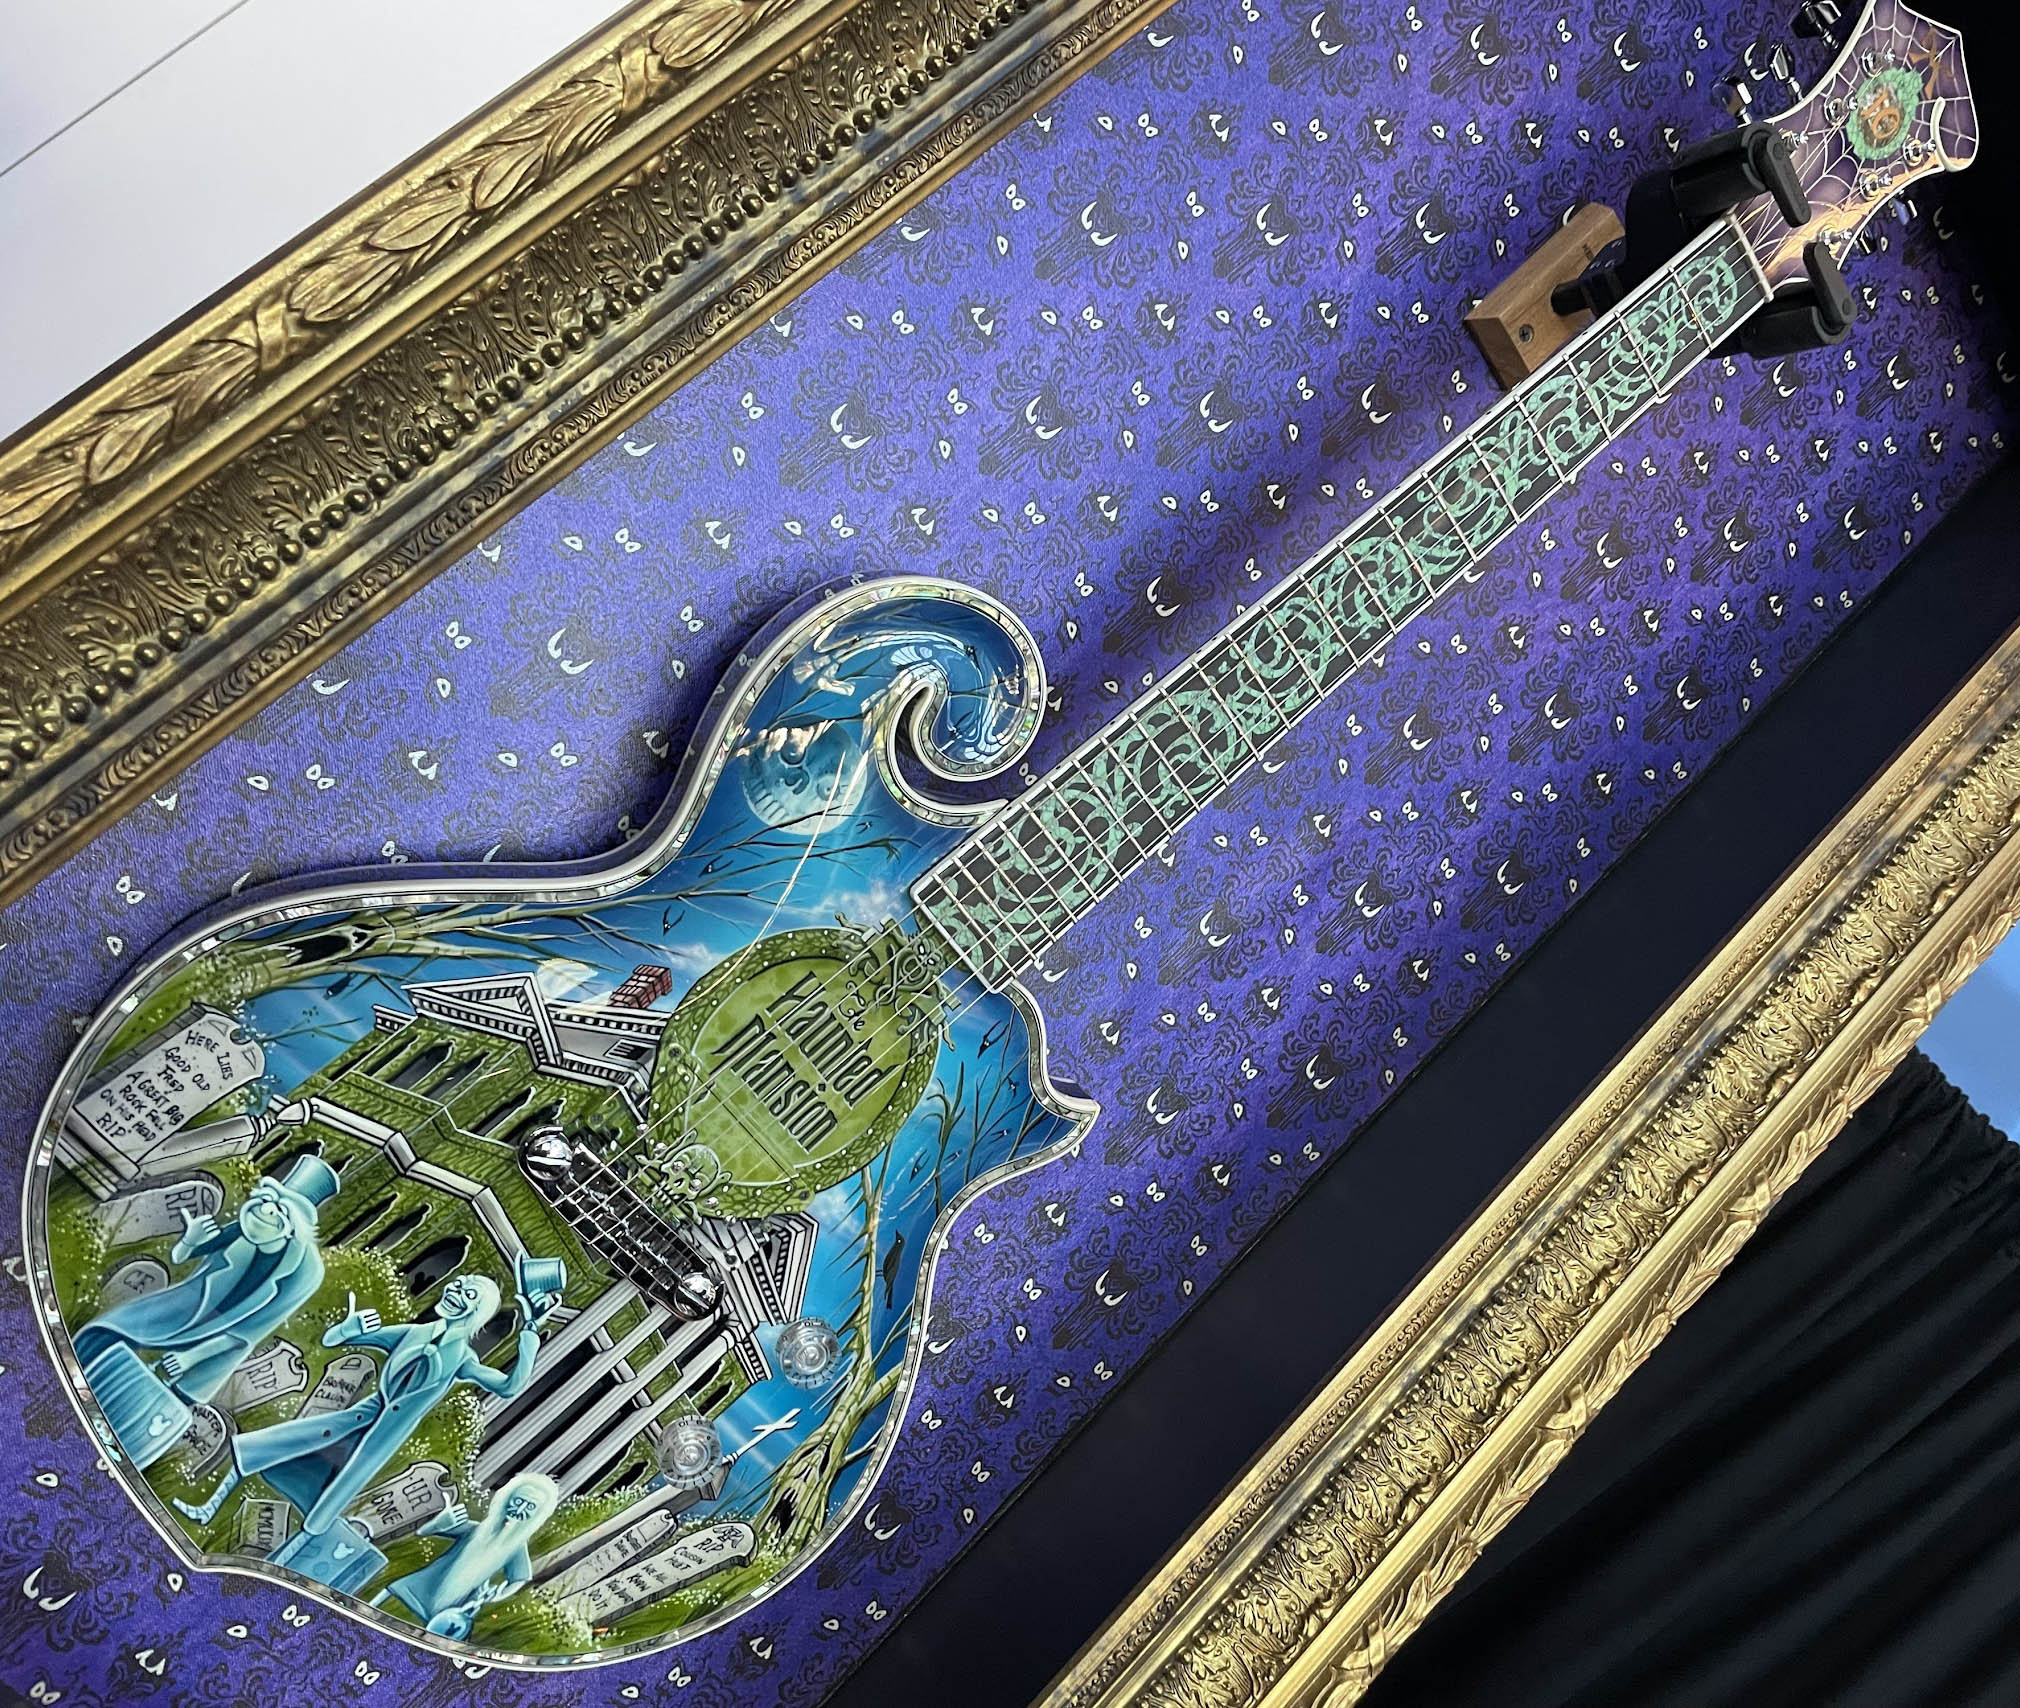 Custom guitars might not be everyone’s thing and often out of the reach of most budgets, but there’s no denying that this Haunted Mansion paint job on Minarik Guitars’ Scroll model is very well done indeed.